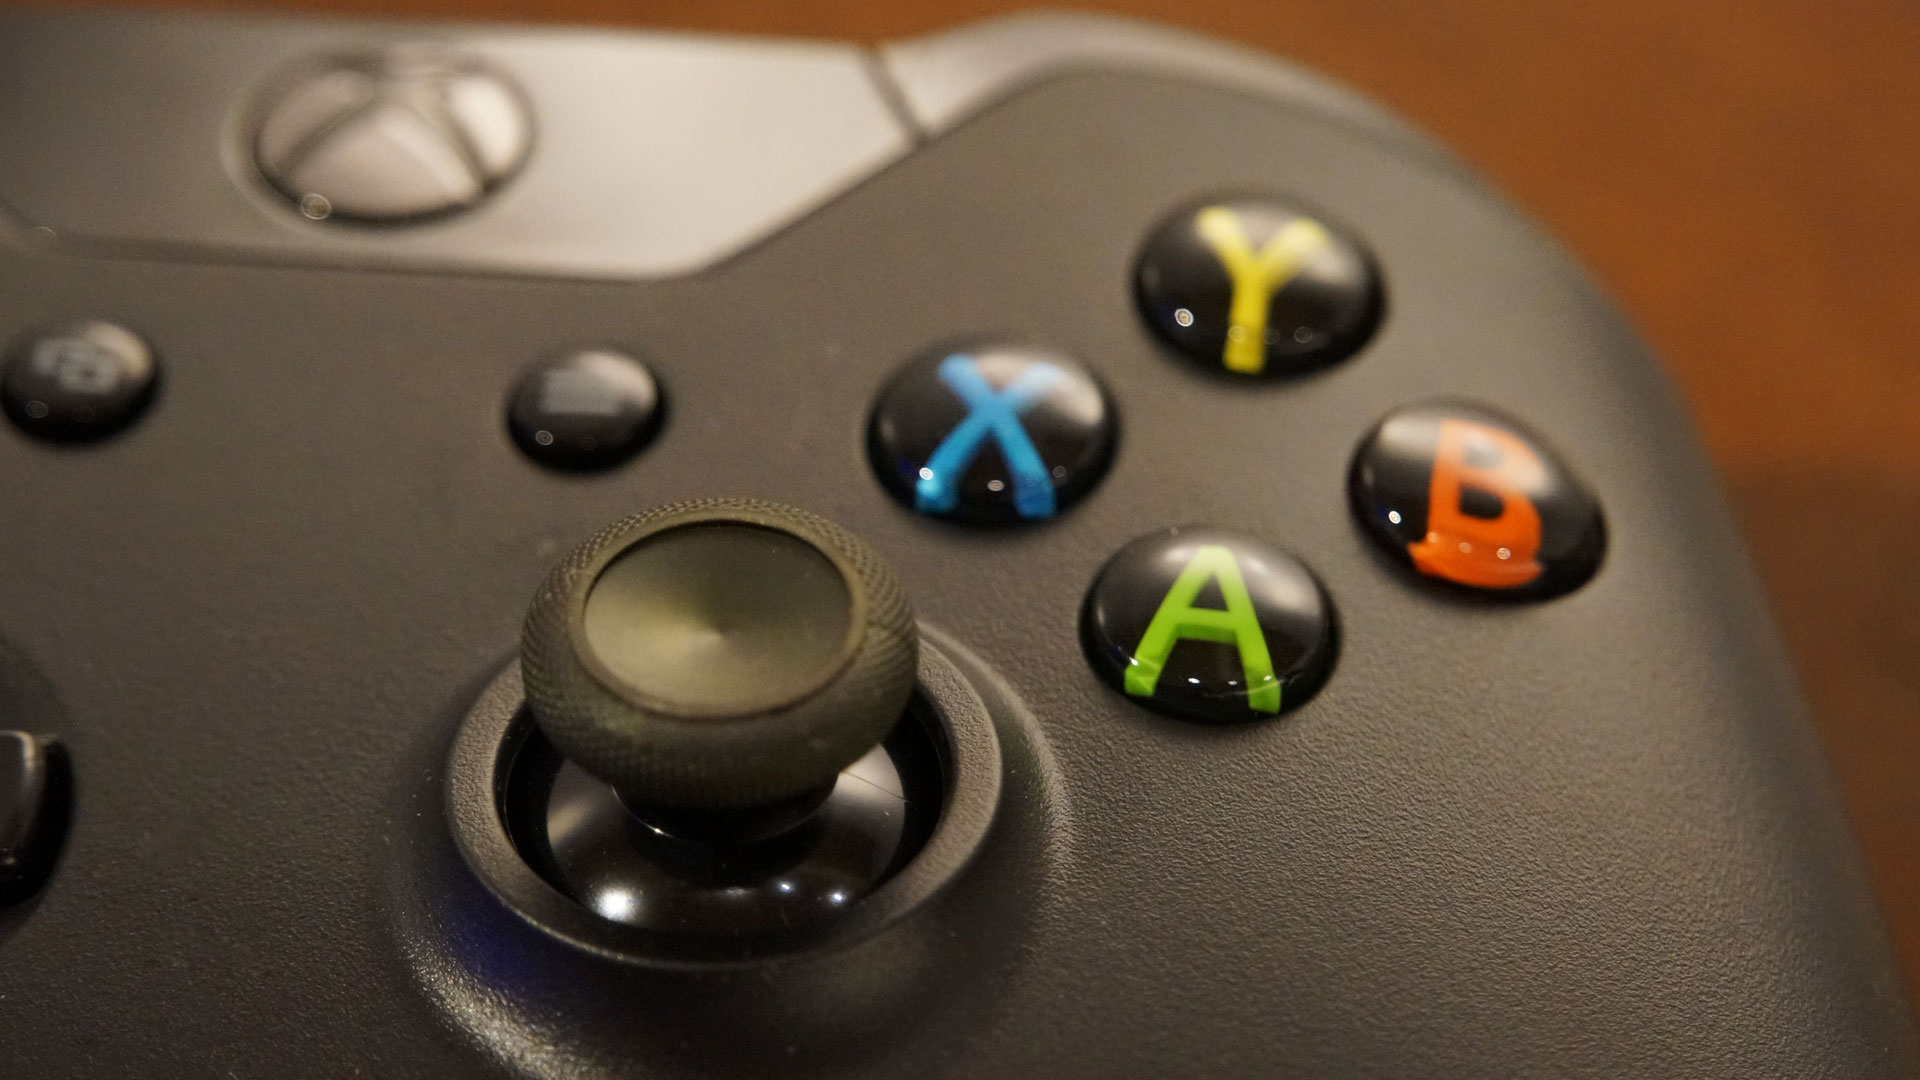 xbox one wallpaper hd,gadget,game controller,joystick,electronic device,technology